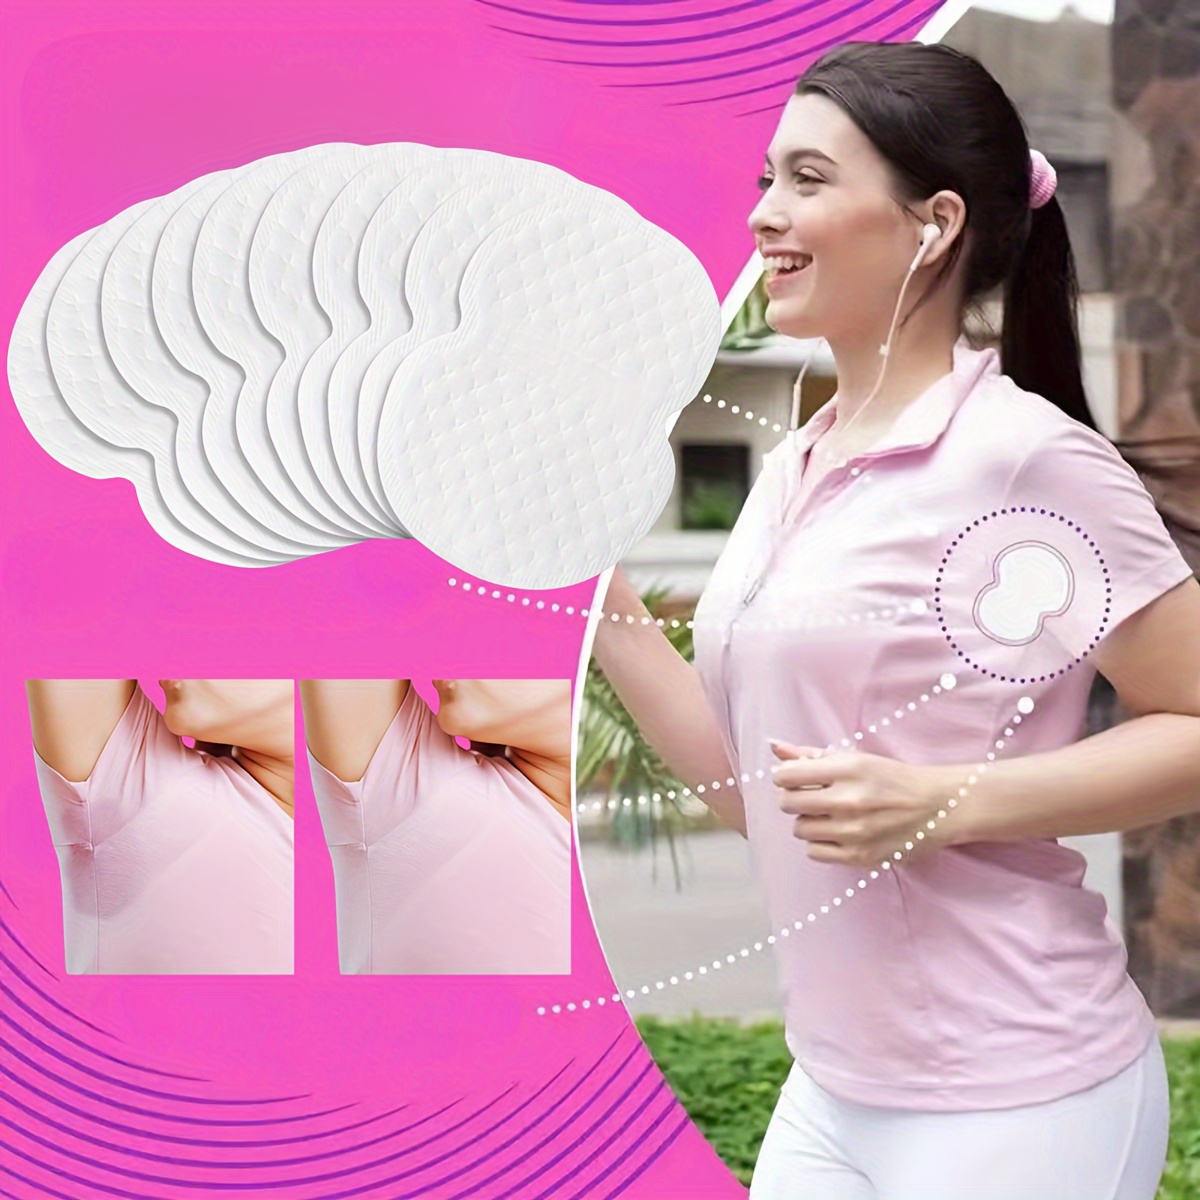 20 50pcs Sweatblock Underarm Sweat Pads Disposable Antiperspirant Pads For  Men And Women Stay Dry And Confident All Day, Check Out Today's Deals Now